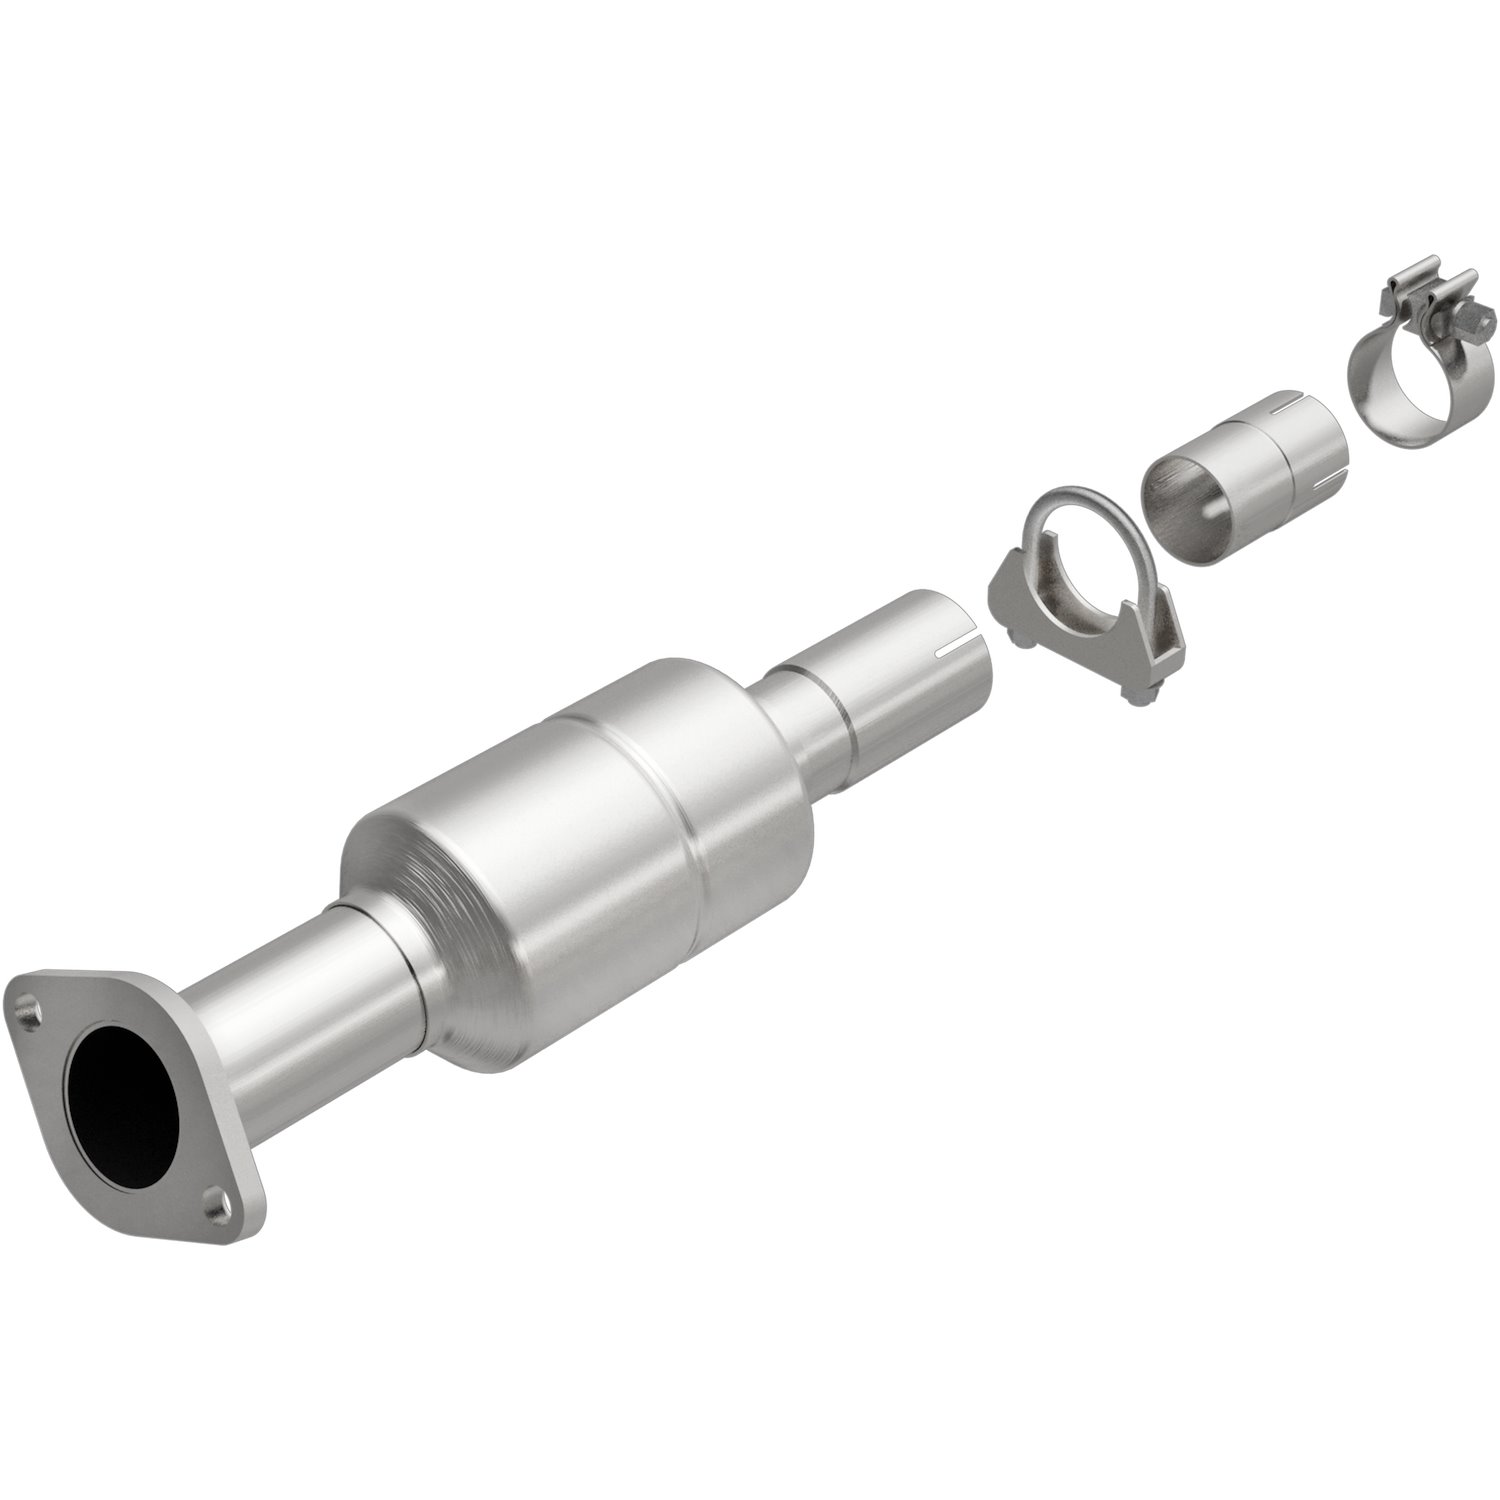 OEM Grade Federal / EPA Compliant Direct-Fit Catalytic Converter 51924